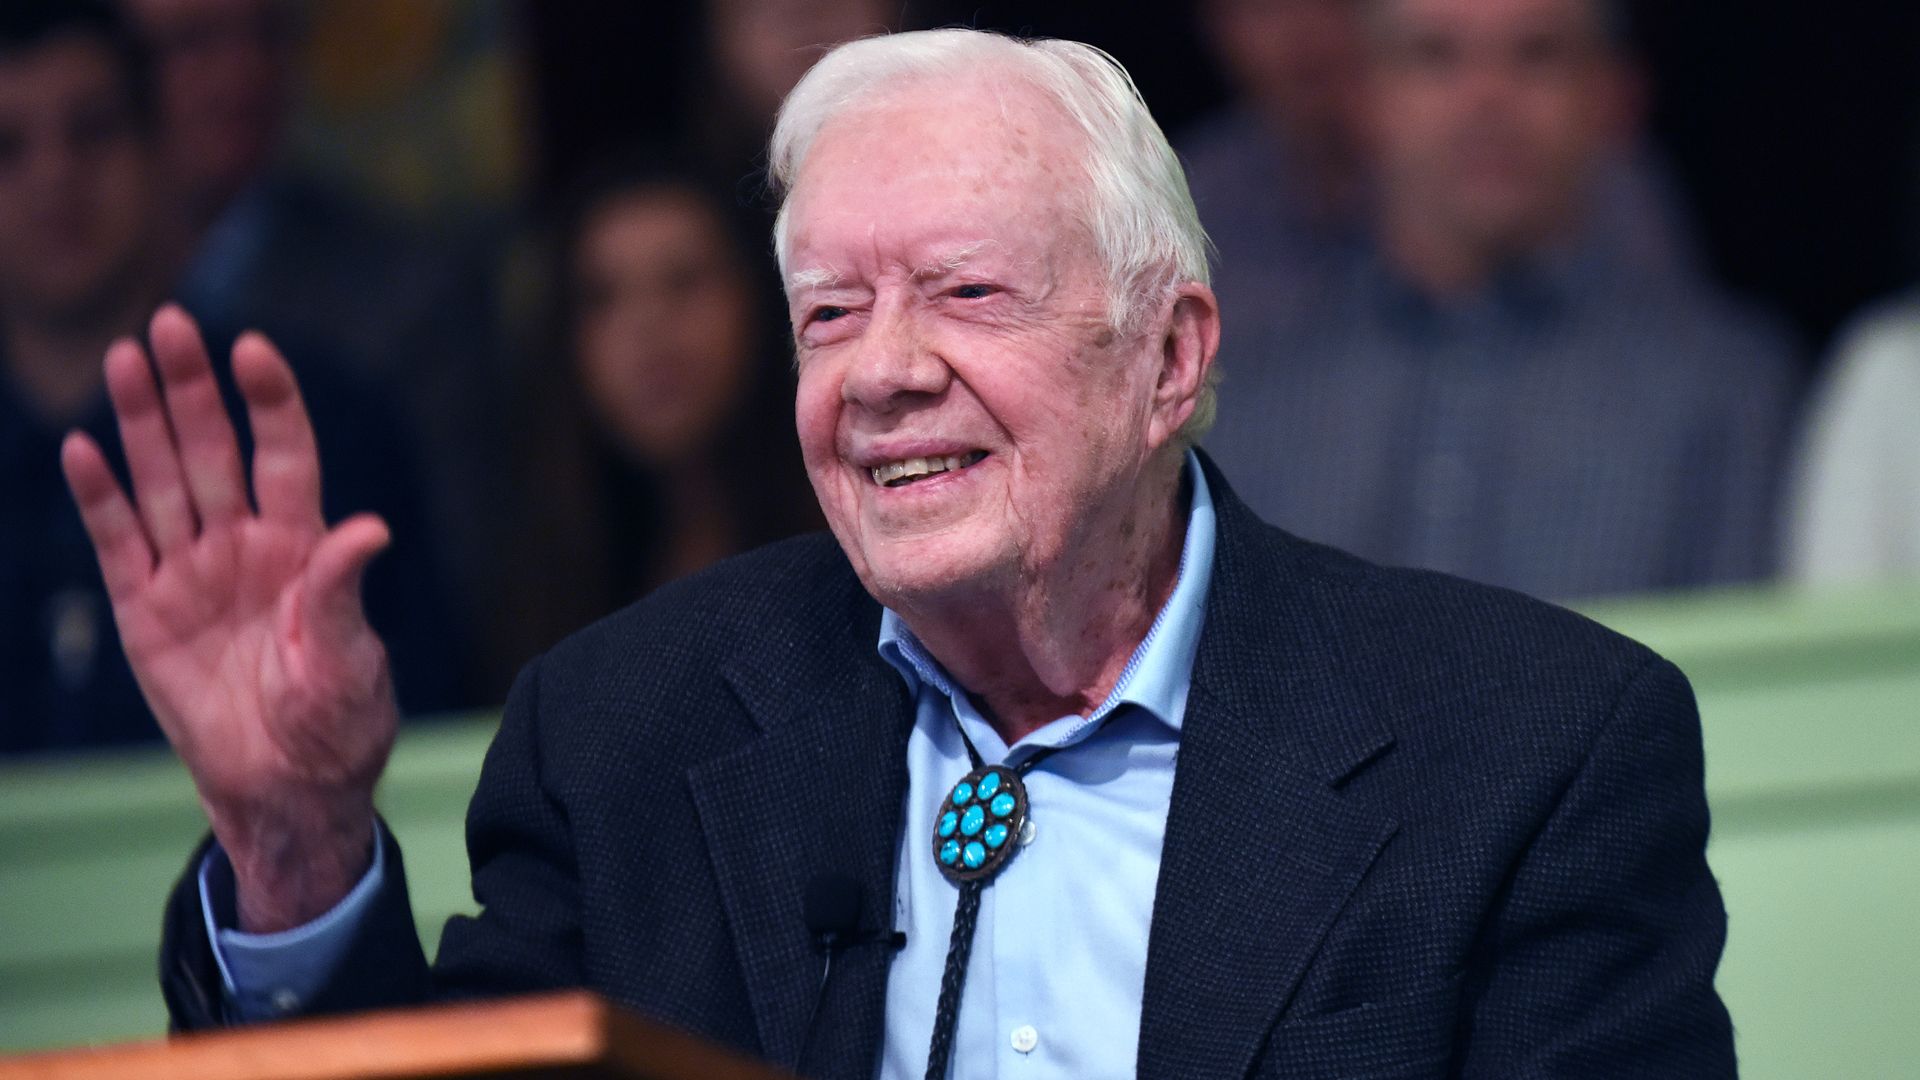 In this image, Jimmy Carter sits and waves